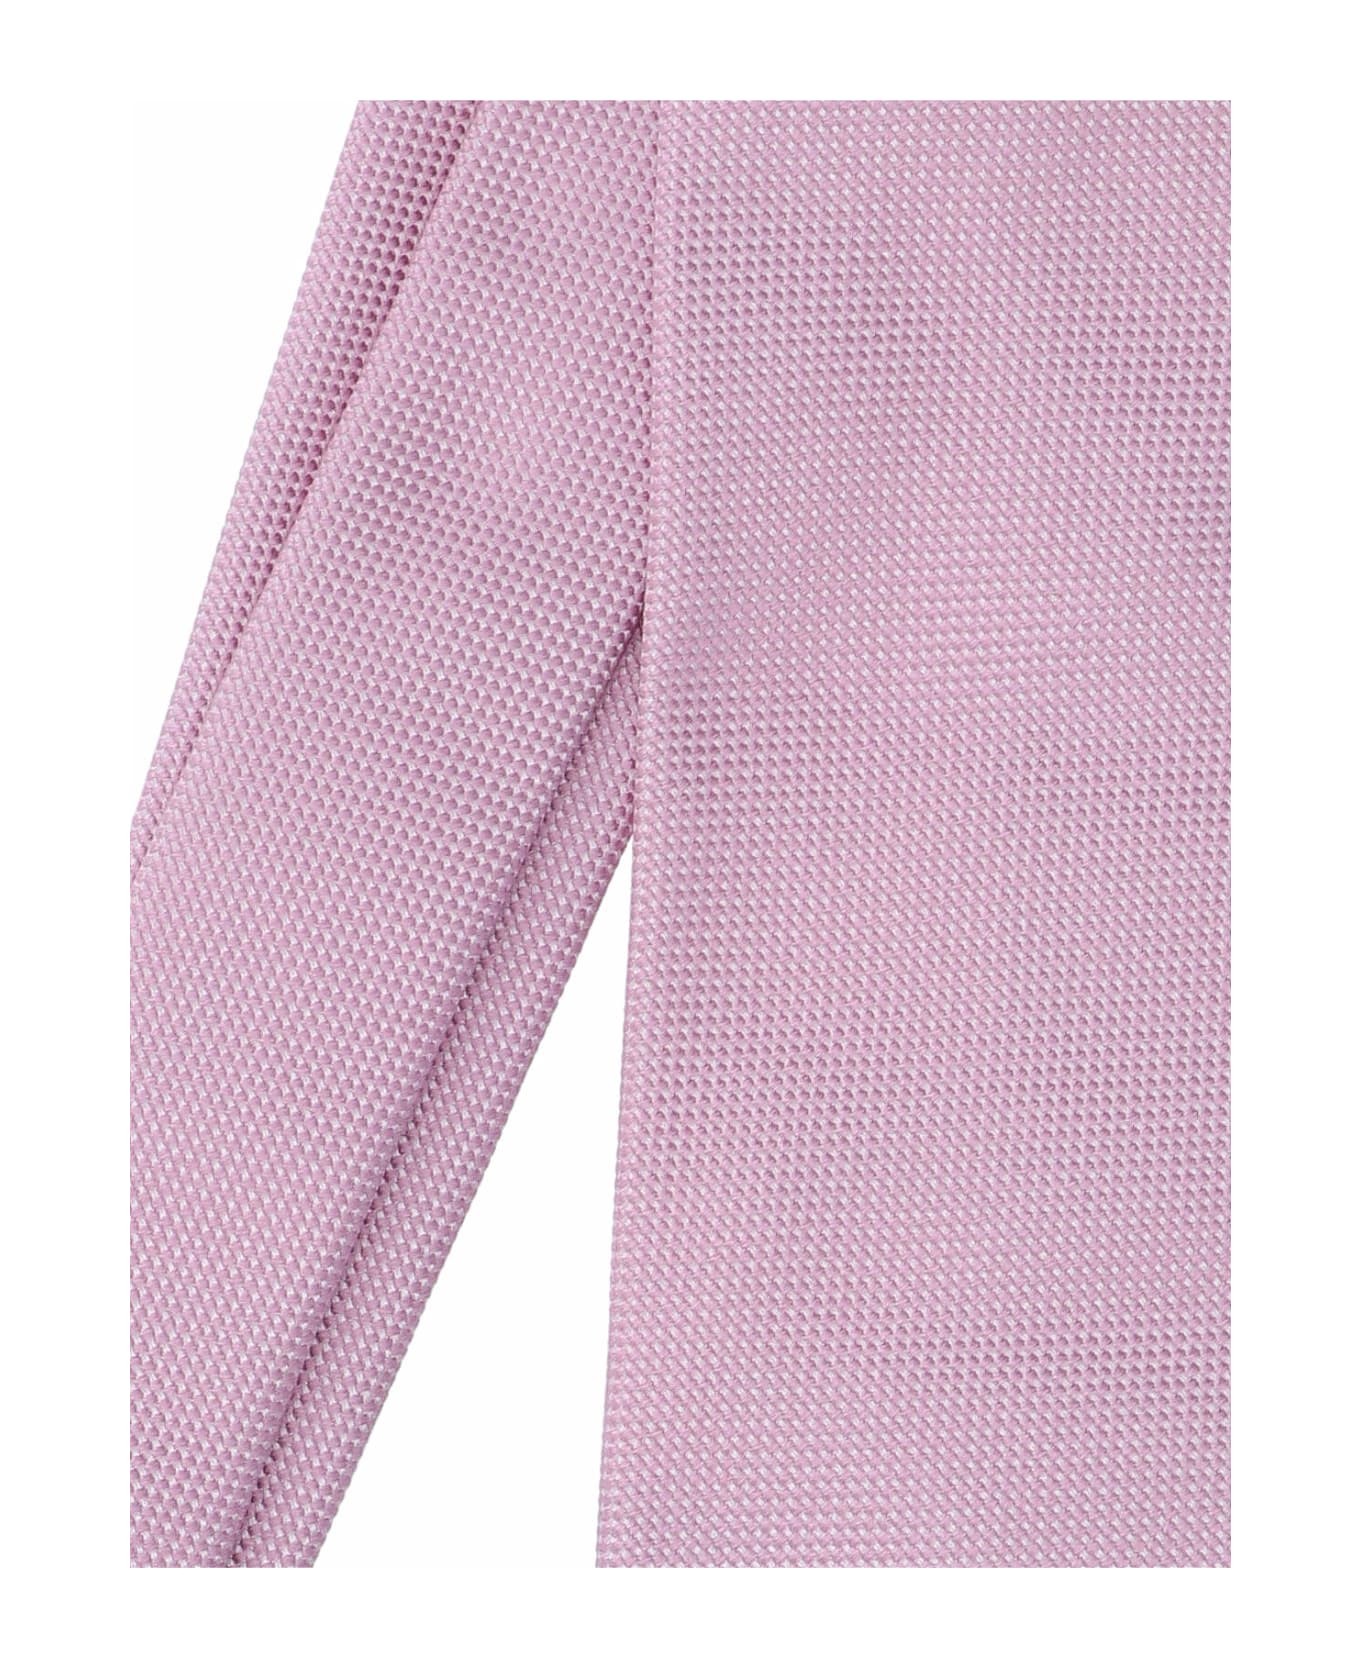 Tom Ford Silk Tie - Pink ネクタイ